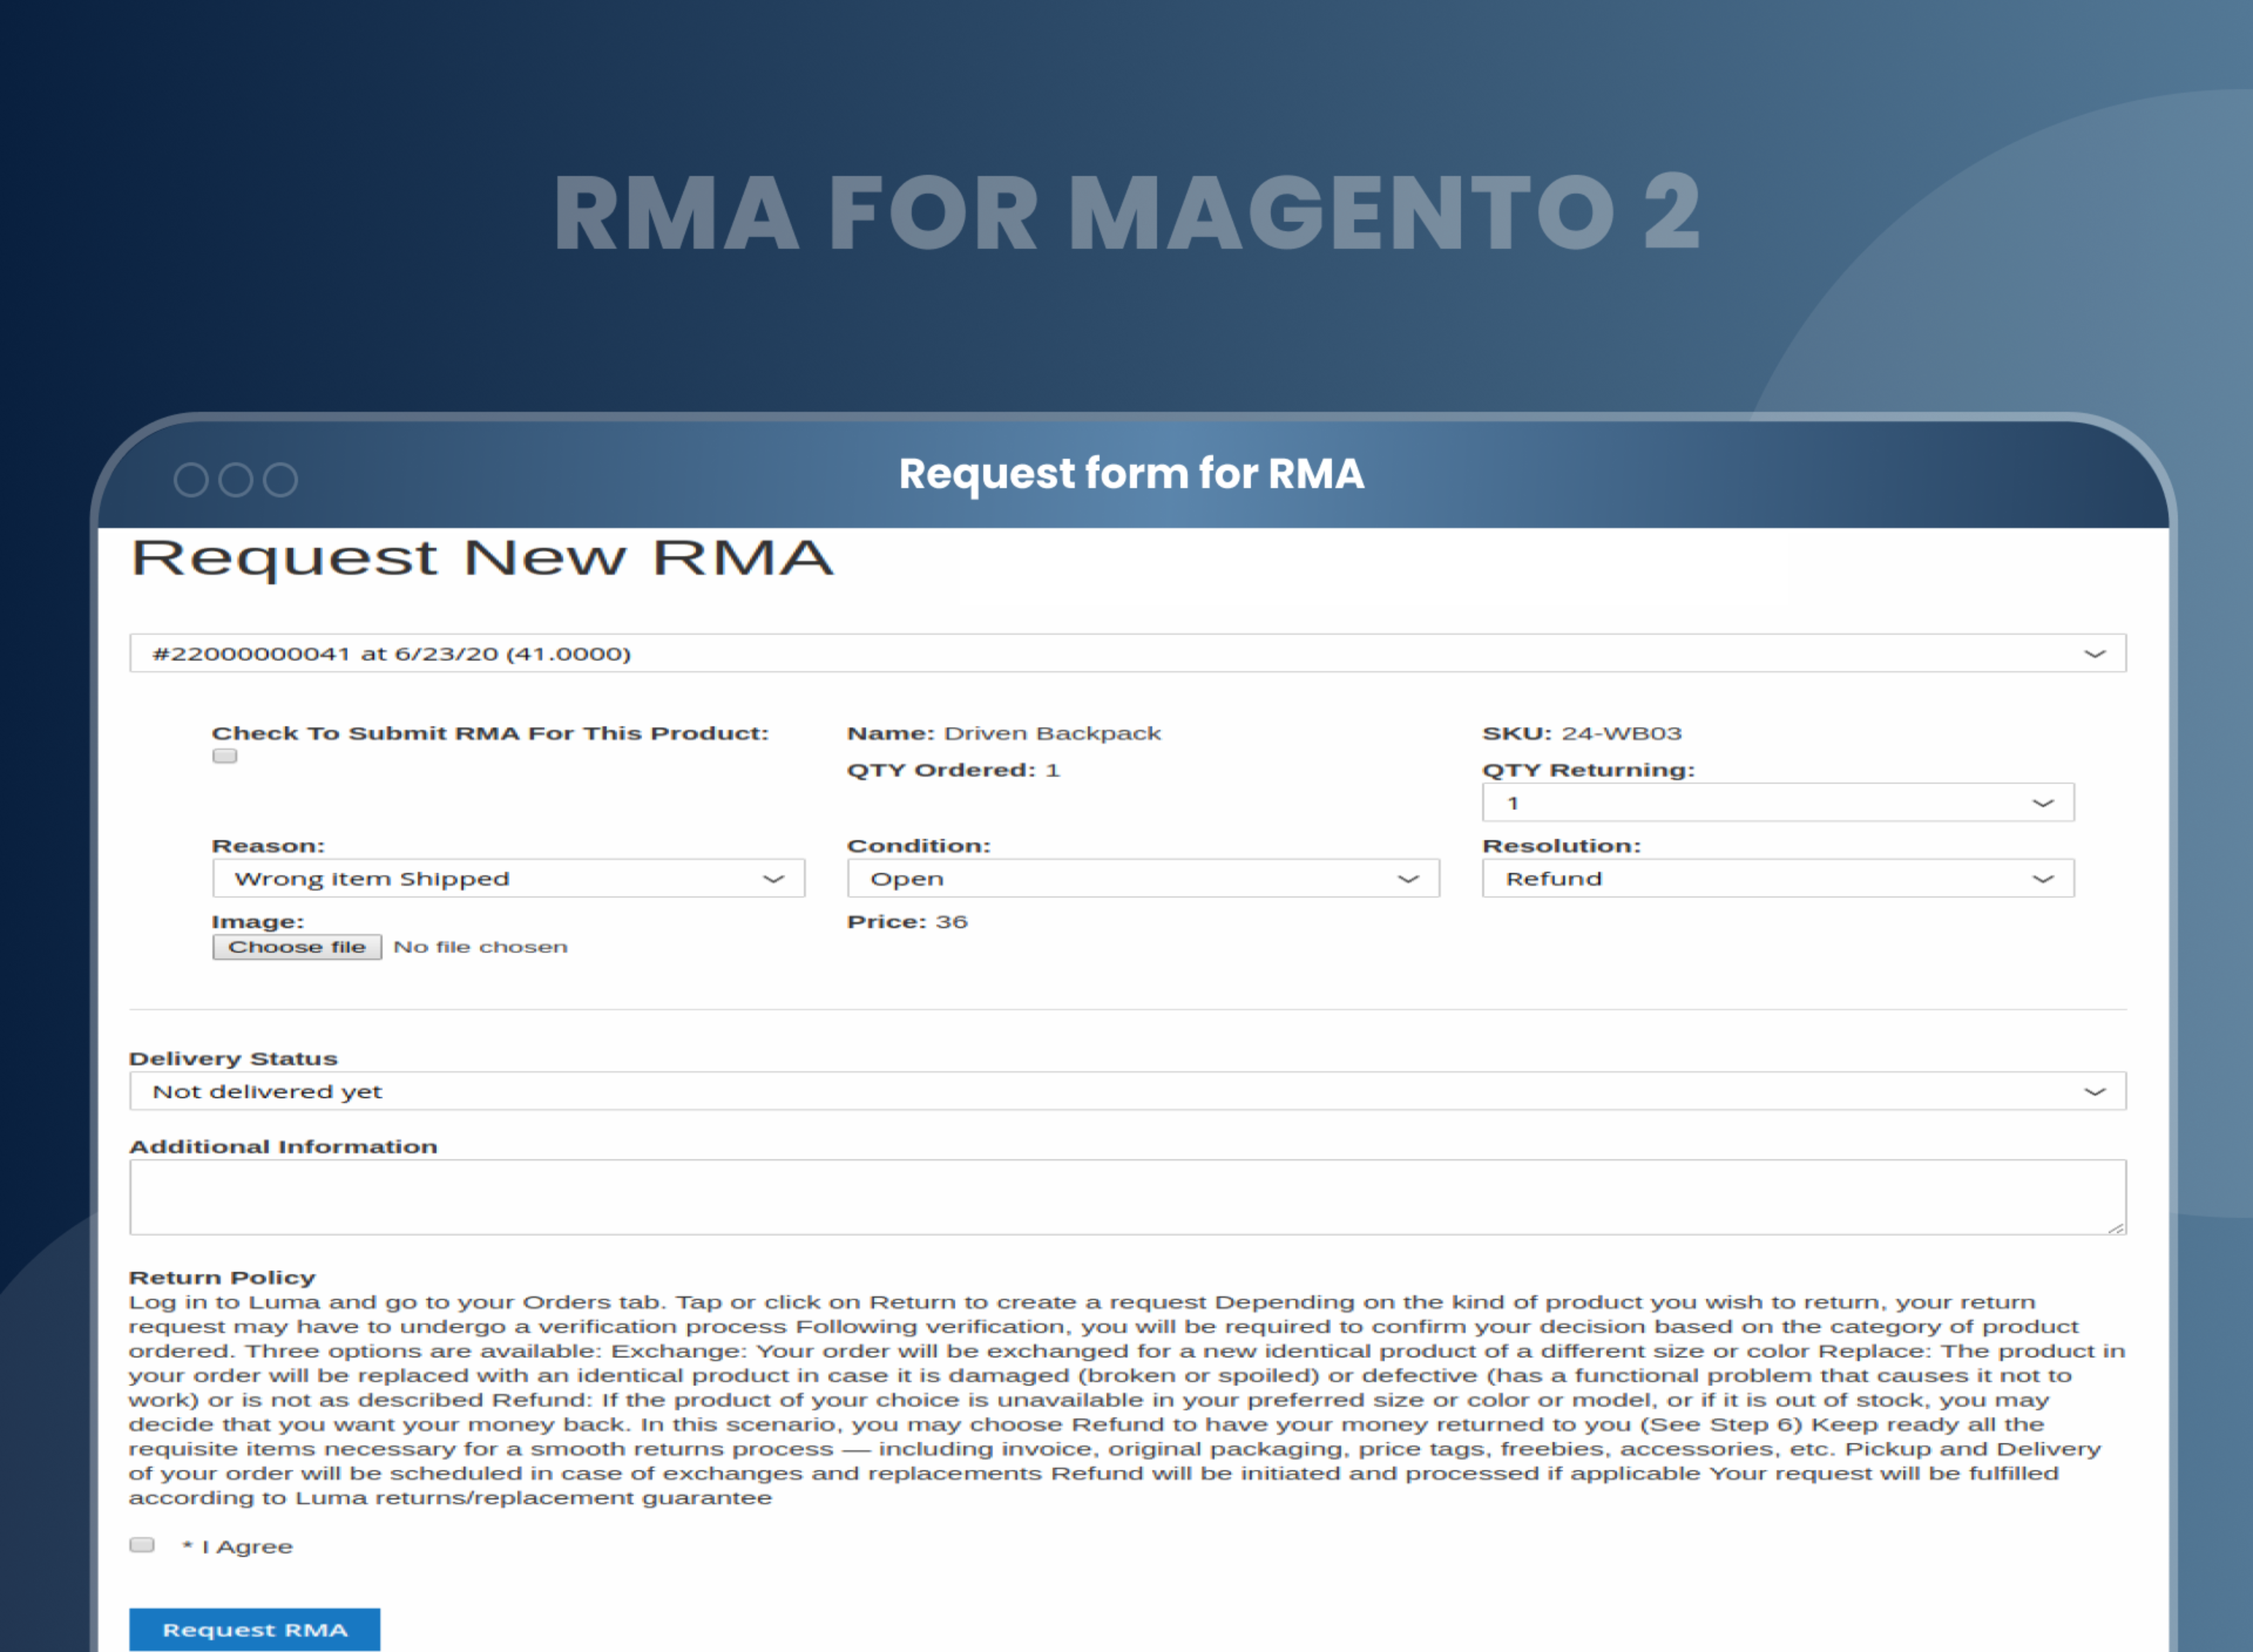 Request form for RMA